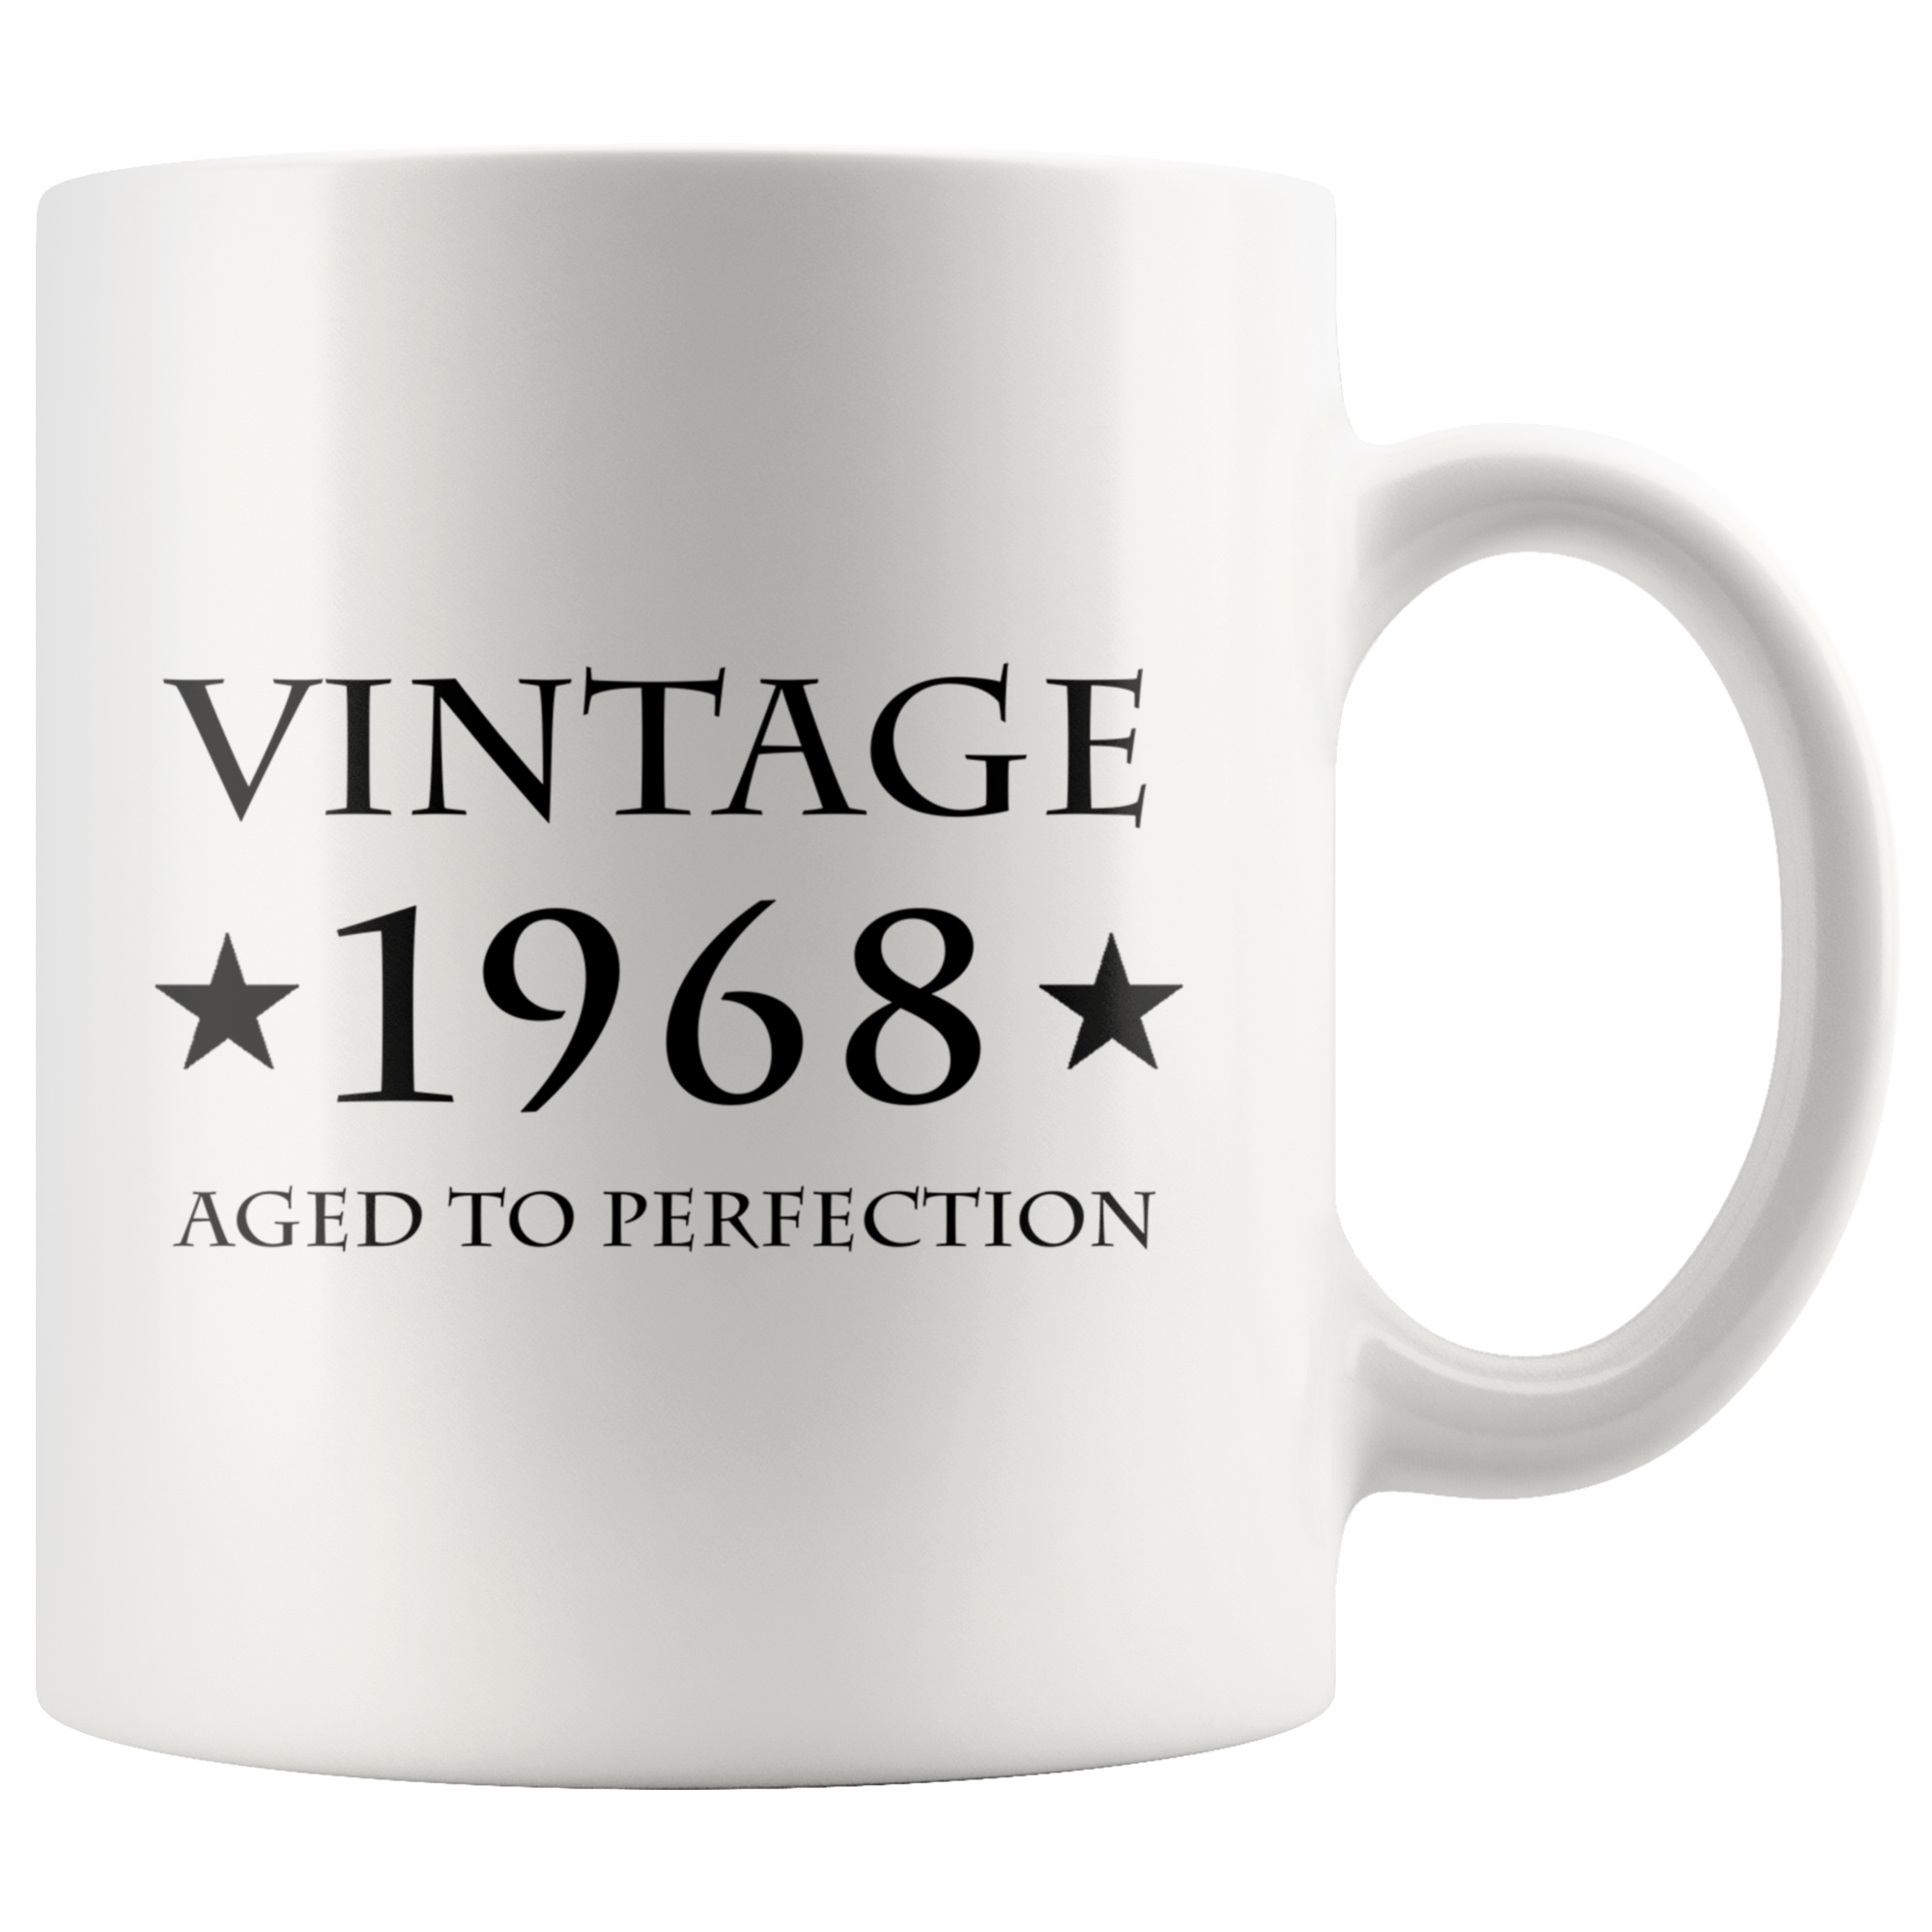 The best cup of coffee since 1968